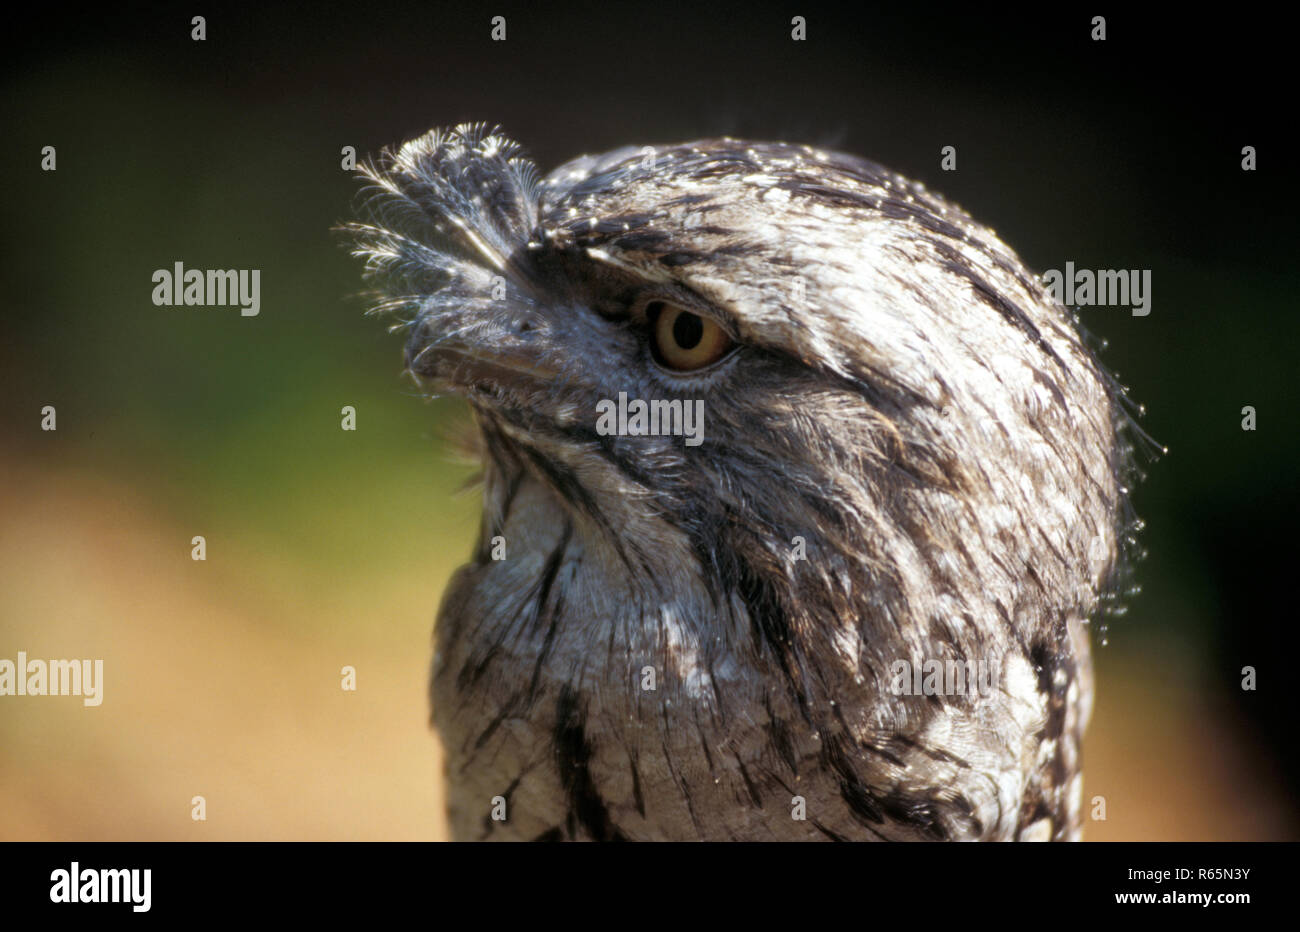 The Tawny frogmouth (Podargus strigoides) is a species of frogmouth native to and found throughout the Australian mainland and Tasmania. Stock Photo